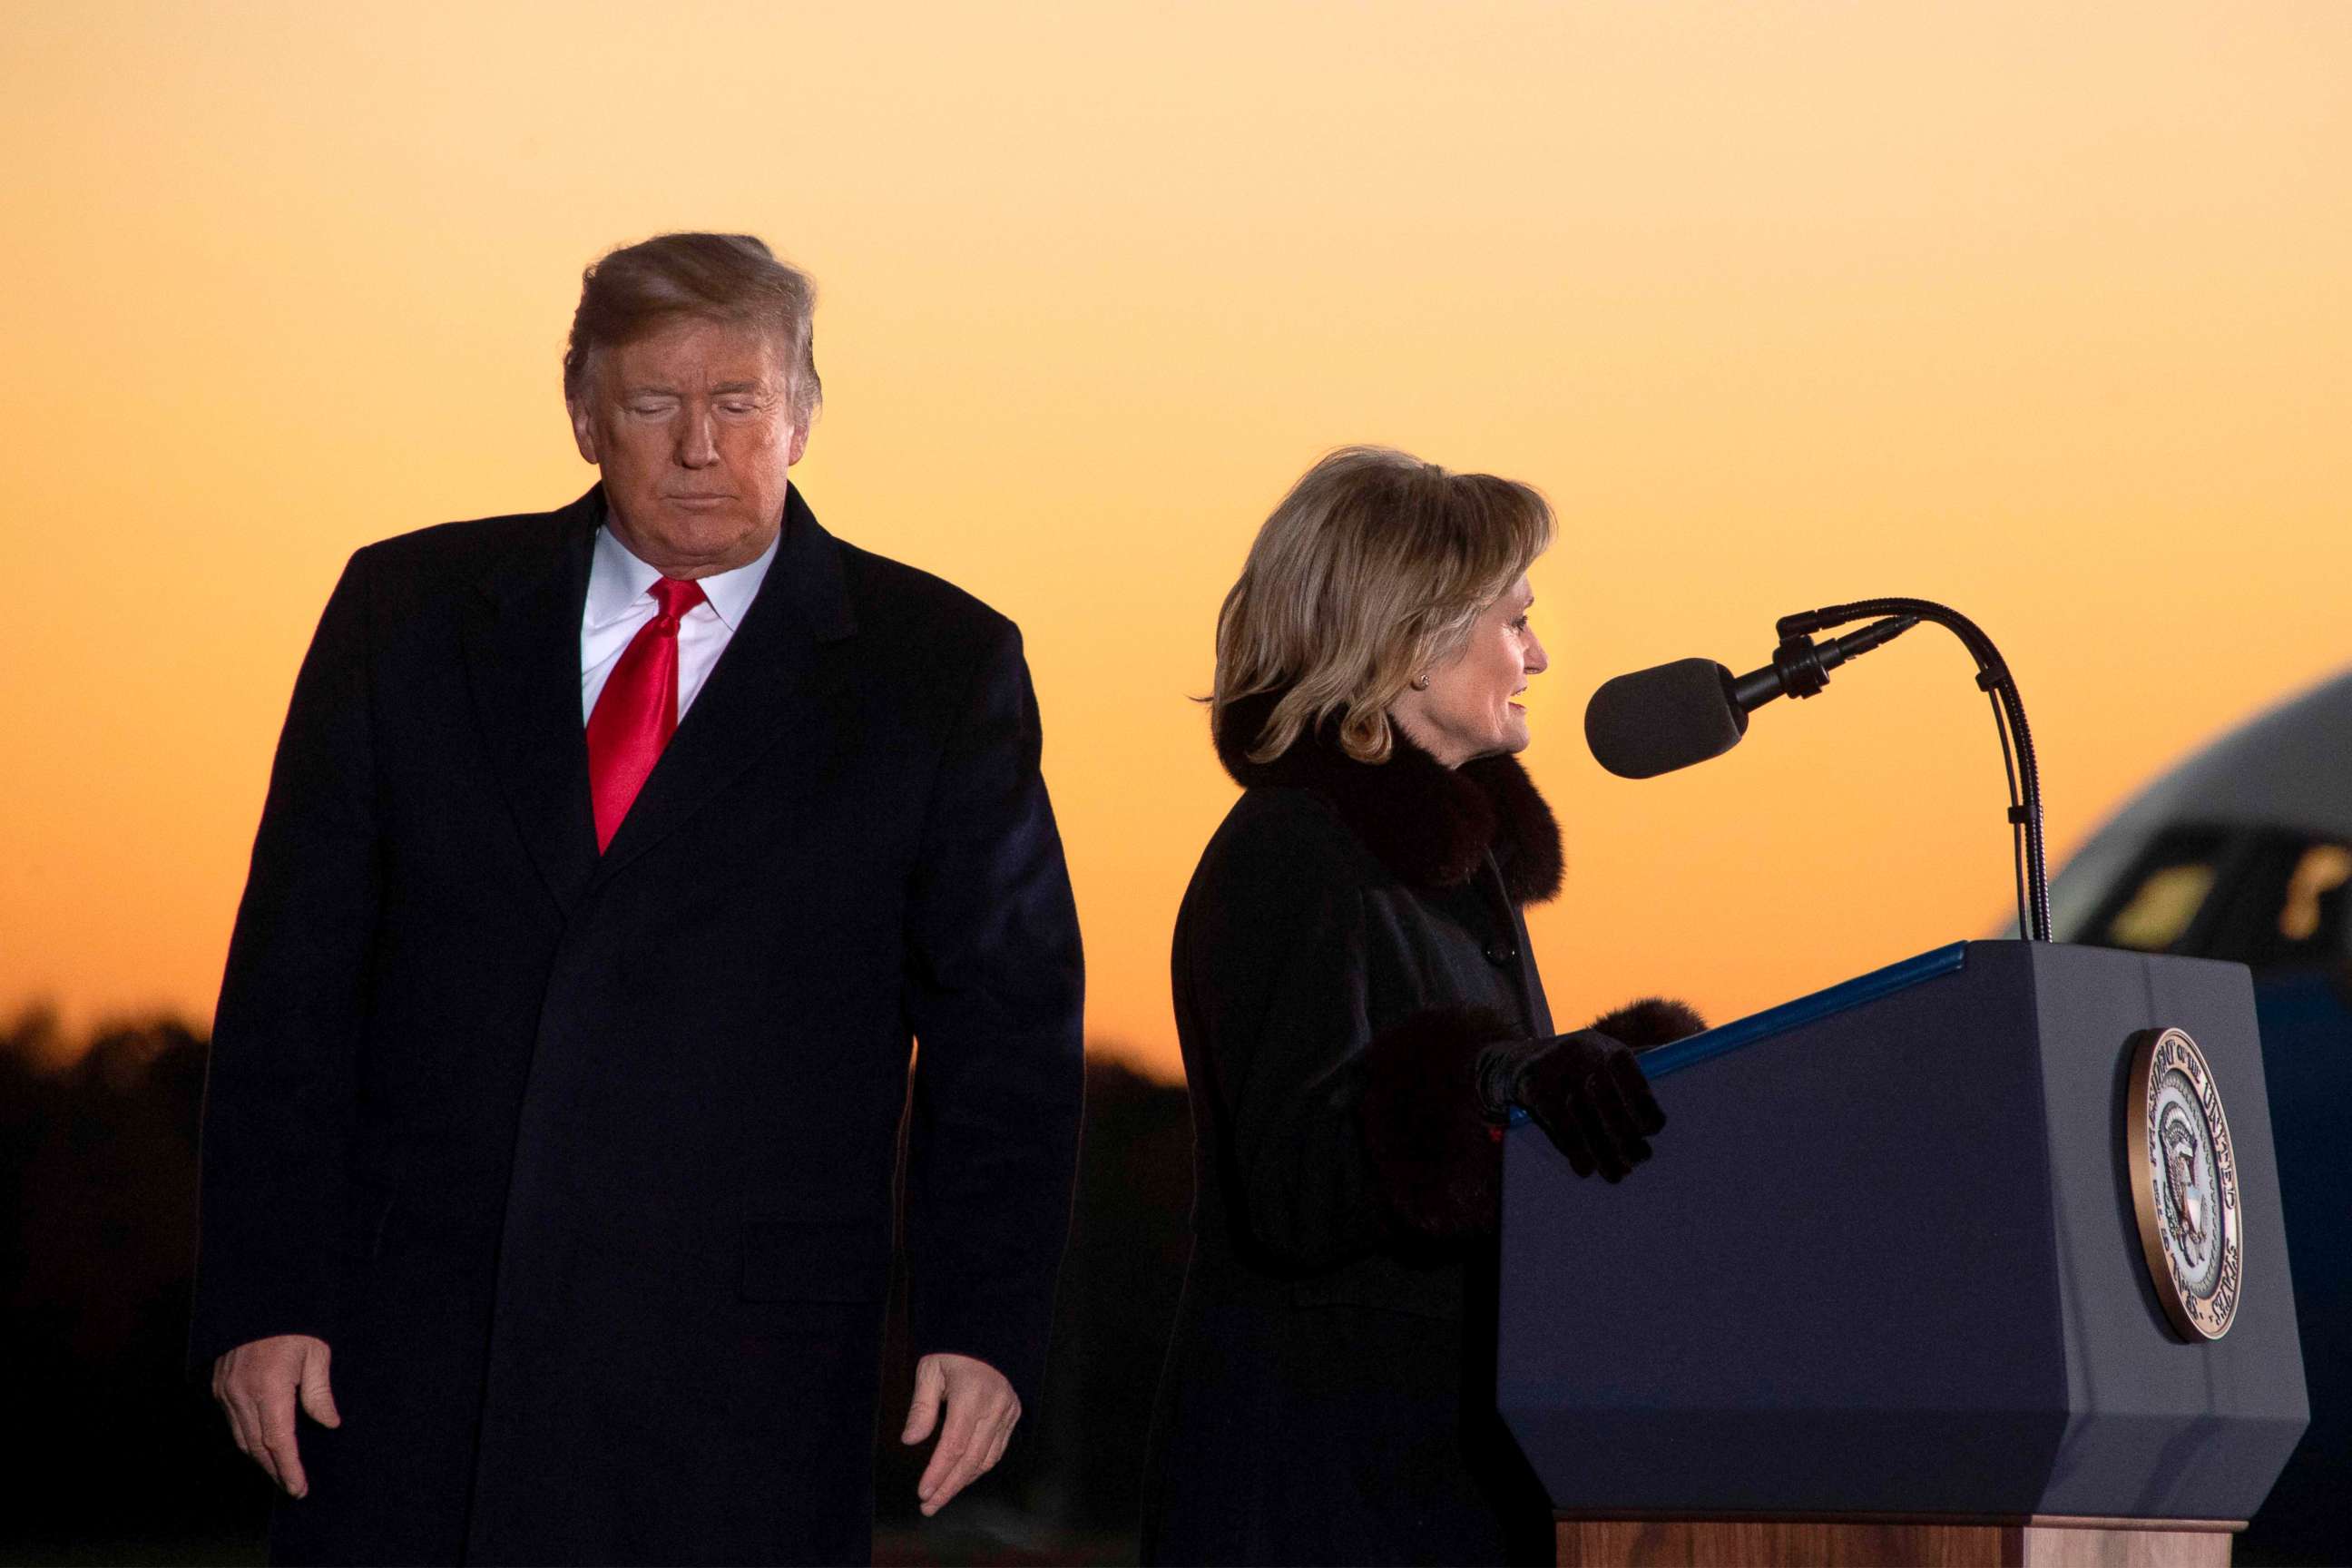 PHOTO: President Donald Trump arrives to deliver remarks as Cindy Hyde-Smith speaks at a Make America Great Again rally in Tupelo, Mississippi, Nov. 26, 2018.